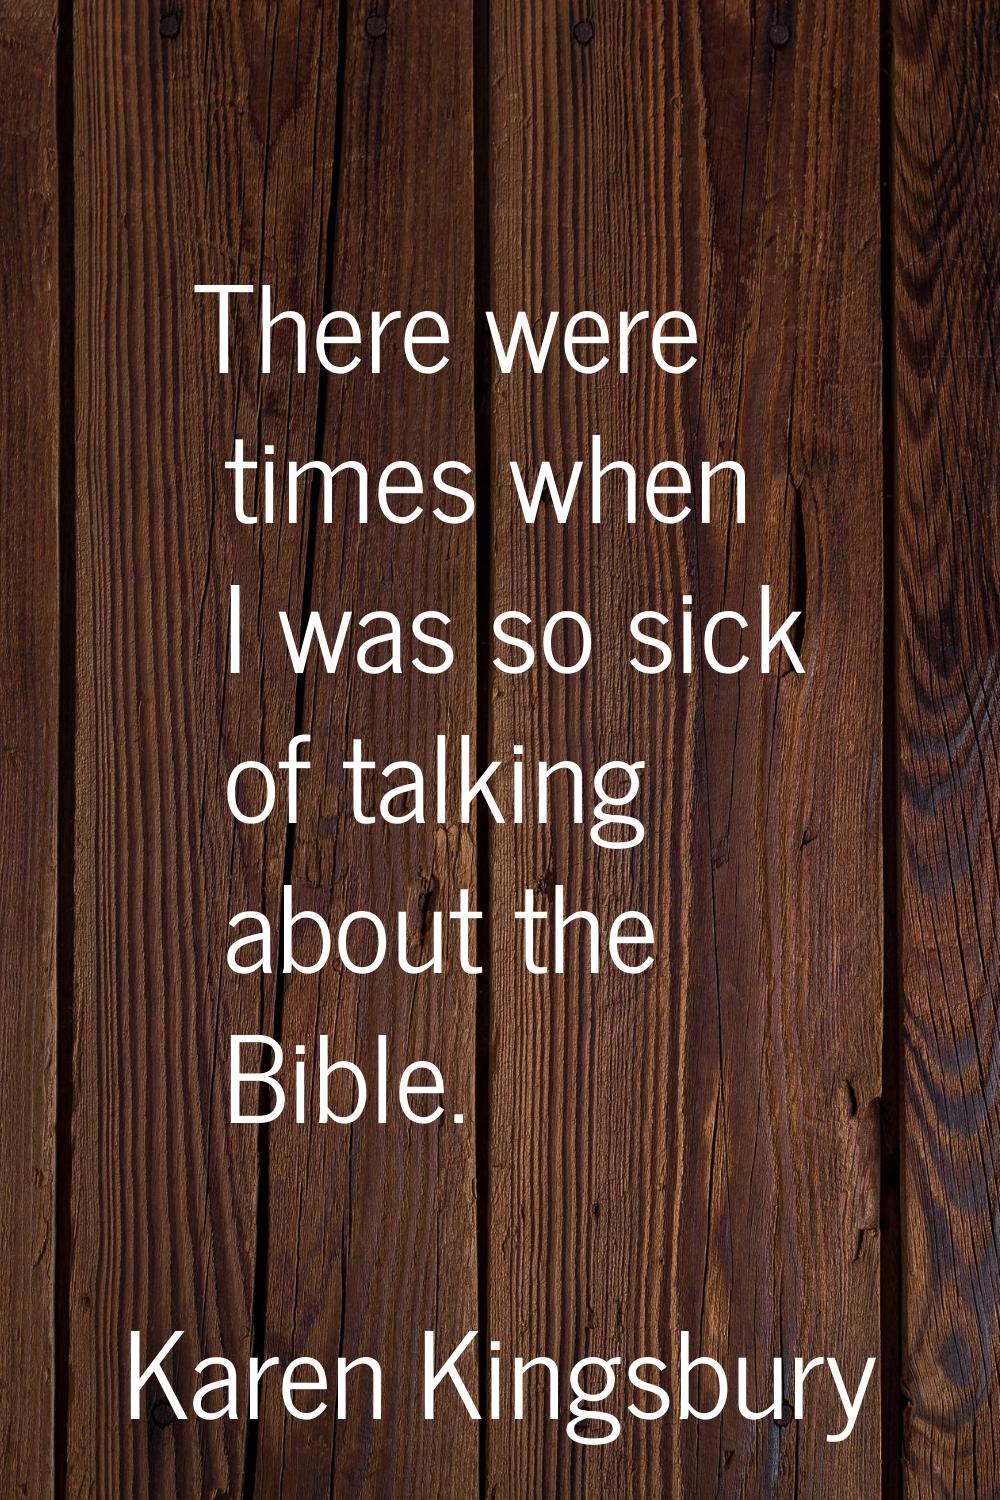 There were times when I was so sick of talking about the Bible.